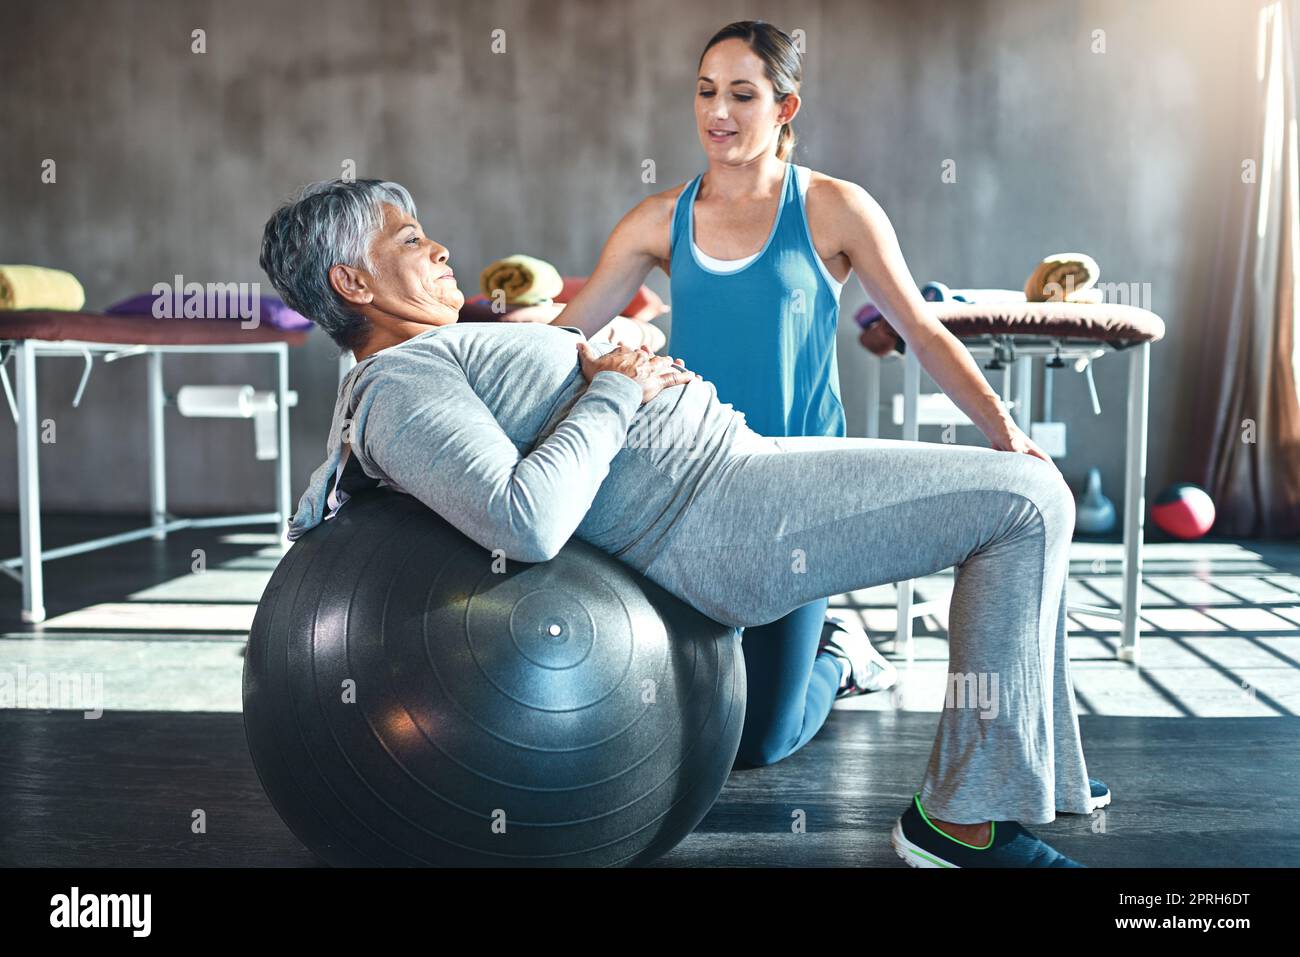 The senior years dont have to be the sedentary years. a senior woman working out with her physiotherapist. Stock Photo